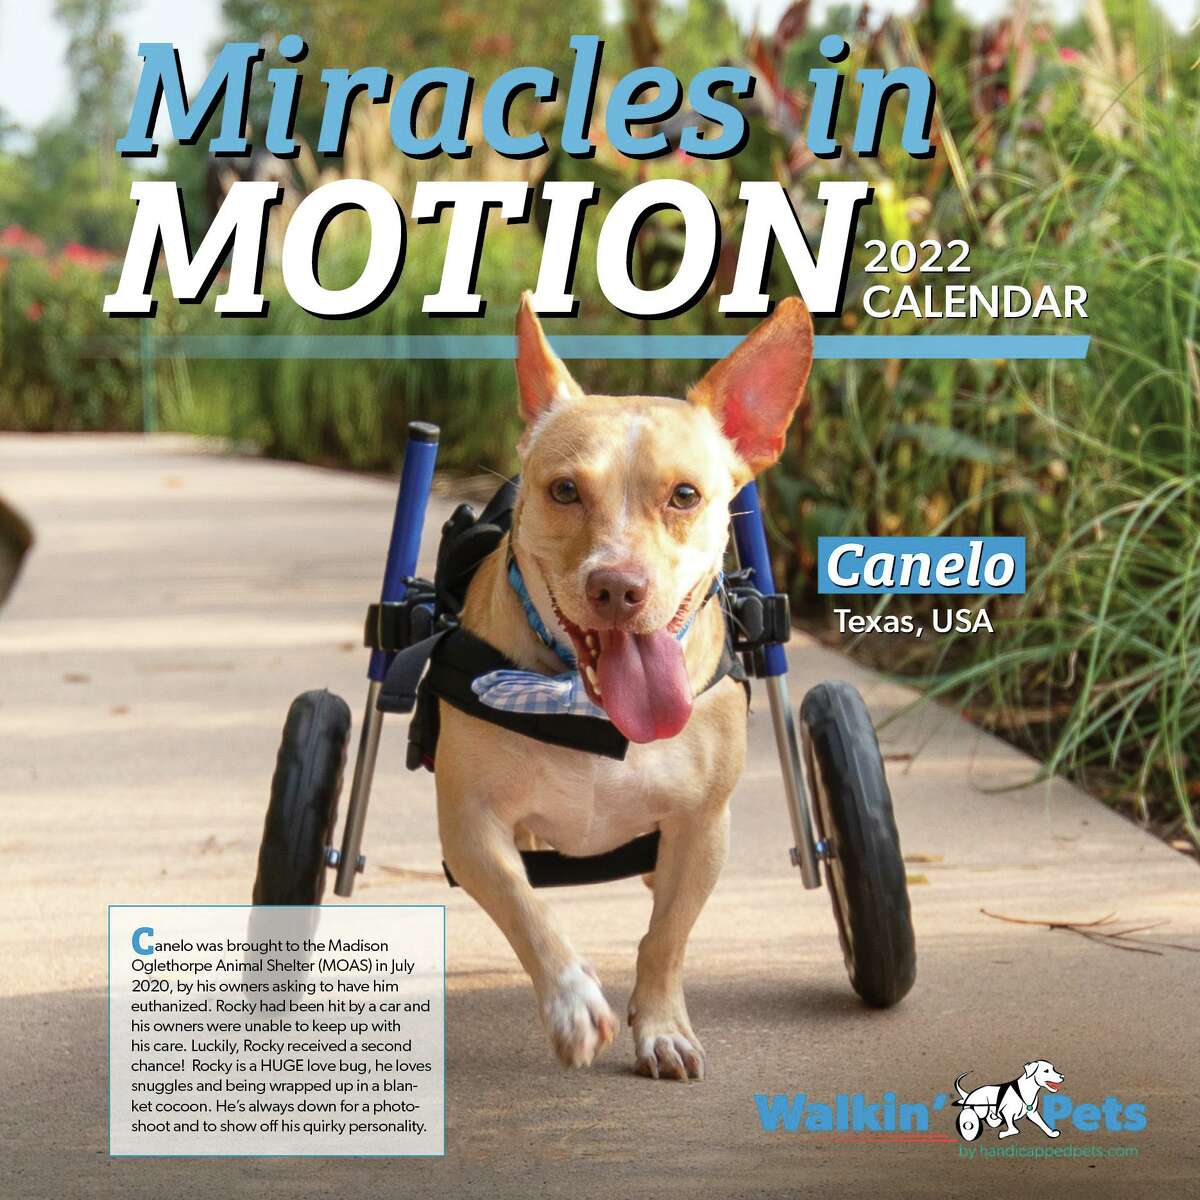 Canelo is pictured happily walking in a Walkin’ Pets wheelchair to support his injured hind legs. The Montgomery Chihuahua will star as the cover for the disabled pets calendar next year.